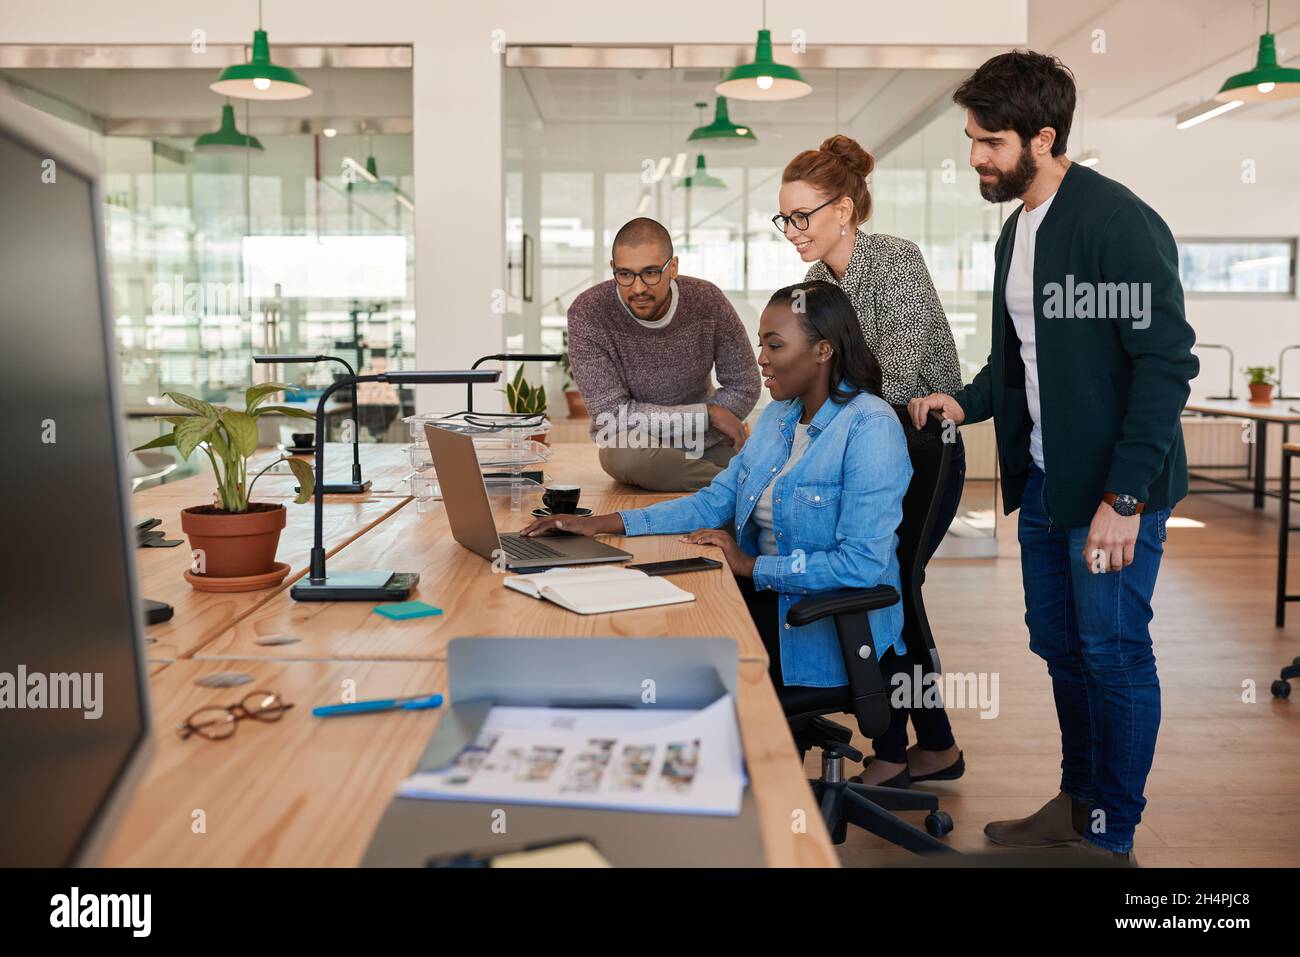 Smiling group of diverse businesspeople working on a laptop together Stock Photo